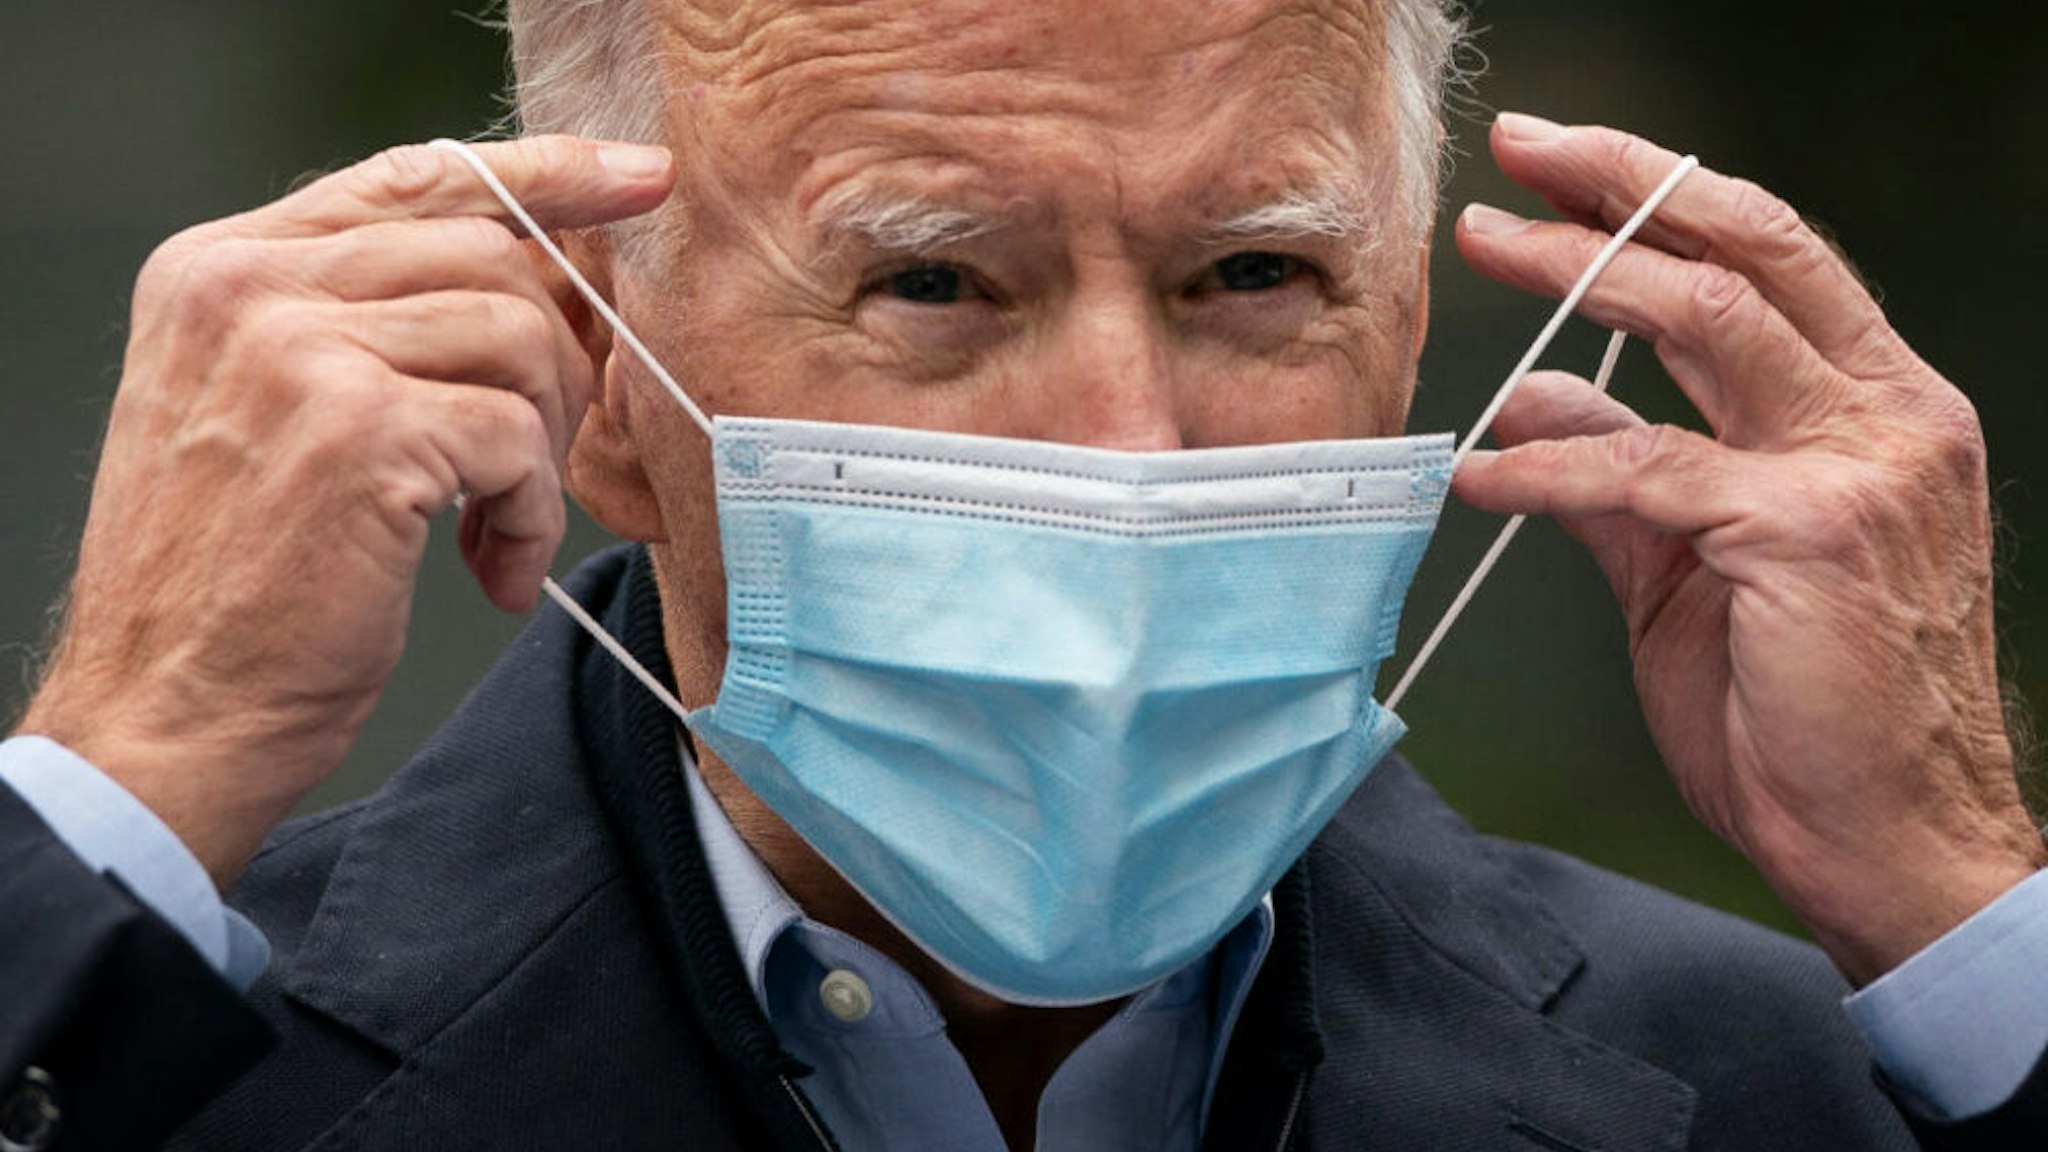 CHESTER, PA - OCTOBER 26: Democratic presidential nominee Joe Biden puts on a face mask while speaking to reporters at a voter mobilization center on October 26, 2020 in Chester, Pennsylvania. In Pennsylvania, Tuesday, October 27 is the last day to request a mail-in ballot or to vote early in person.